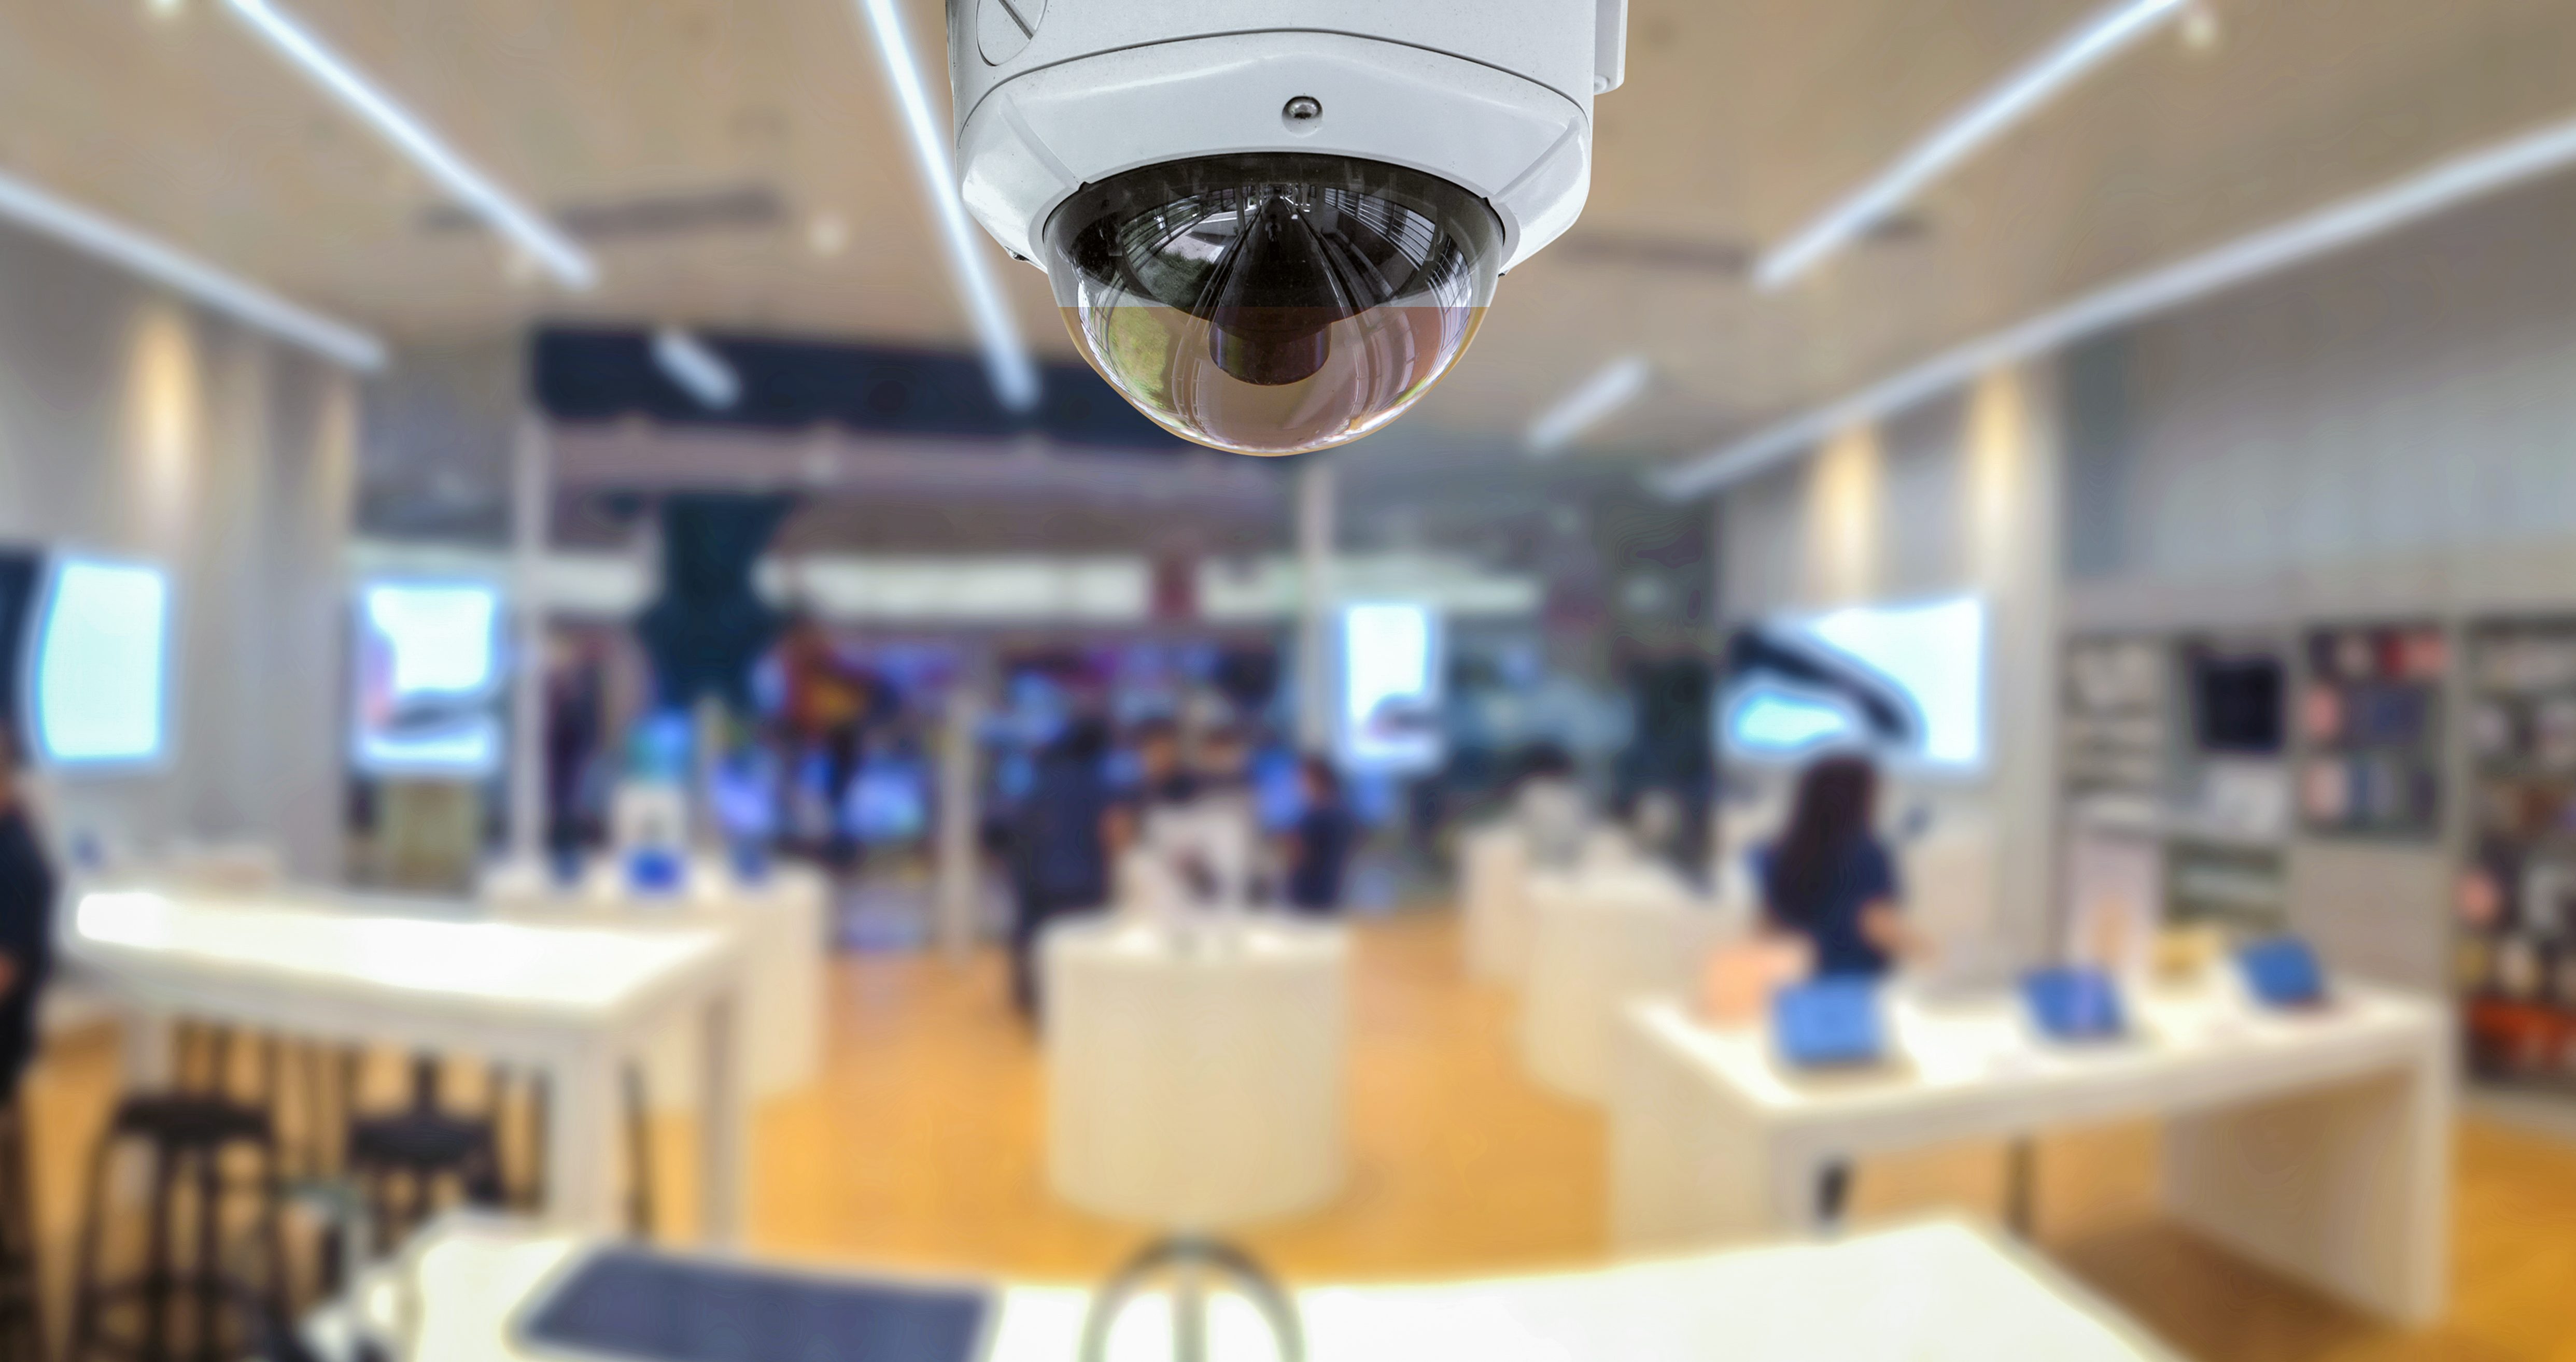 Security Systems and Installations